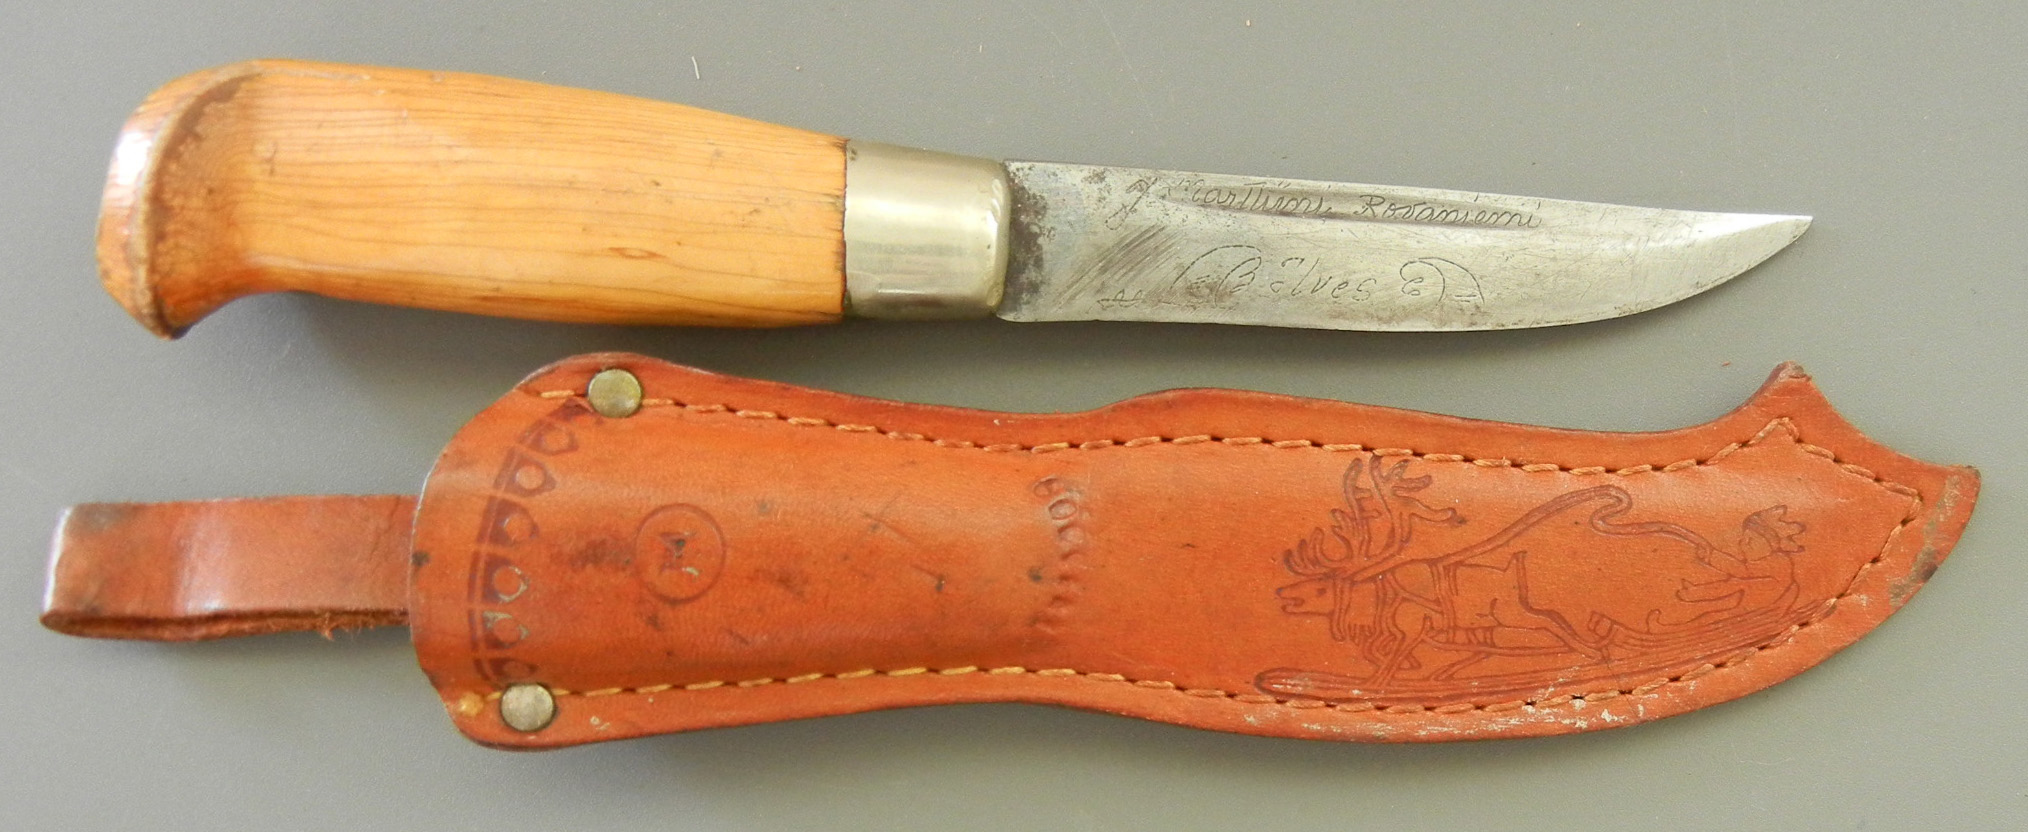 SOLD - Marttiini Ilves Knife - SOLD - Click Image to Close